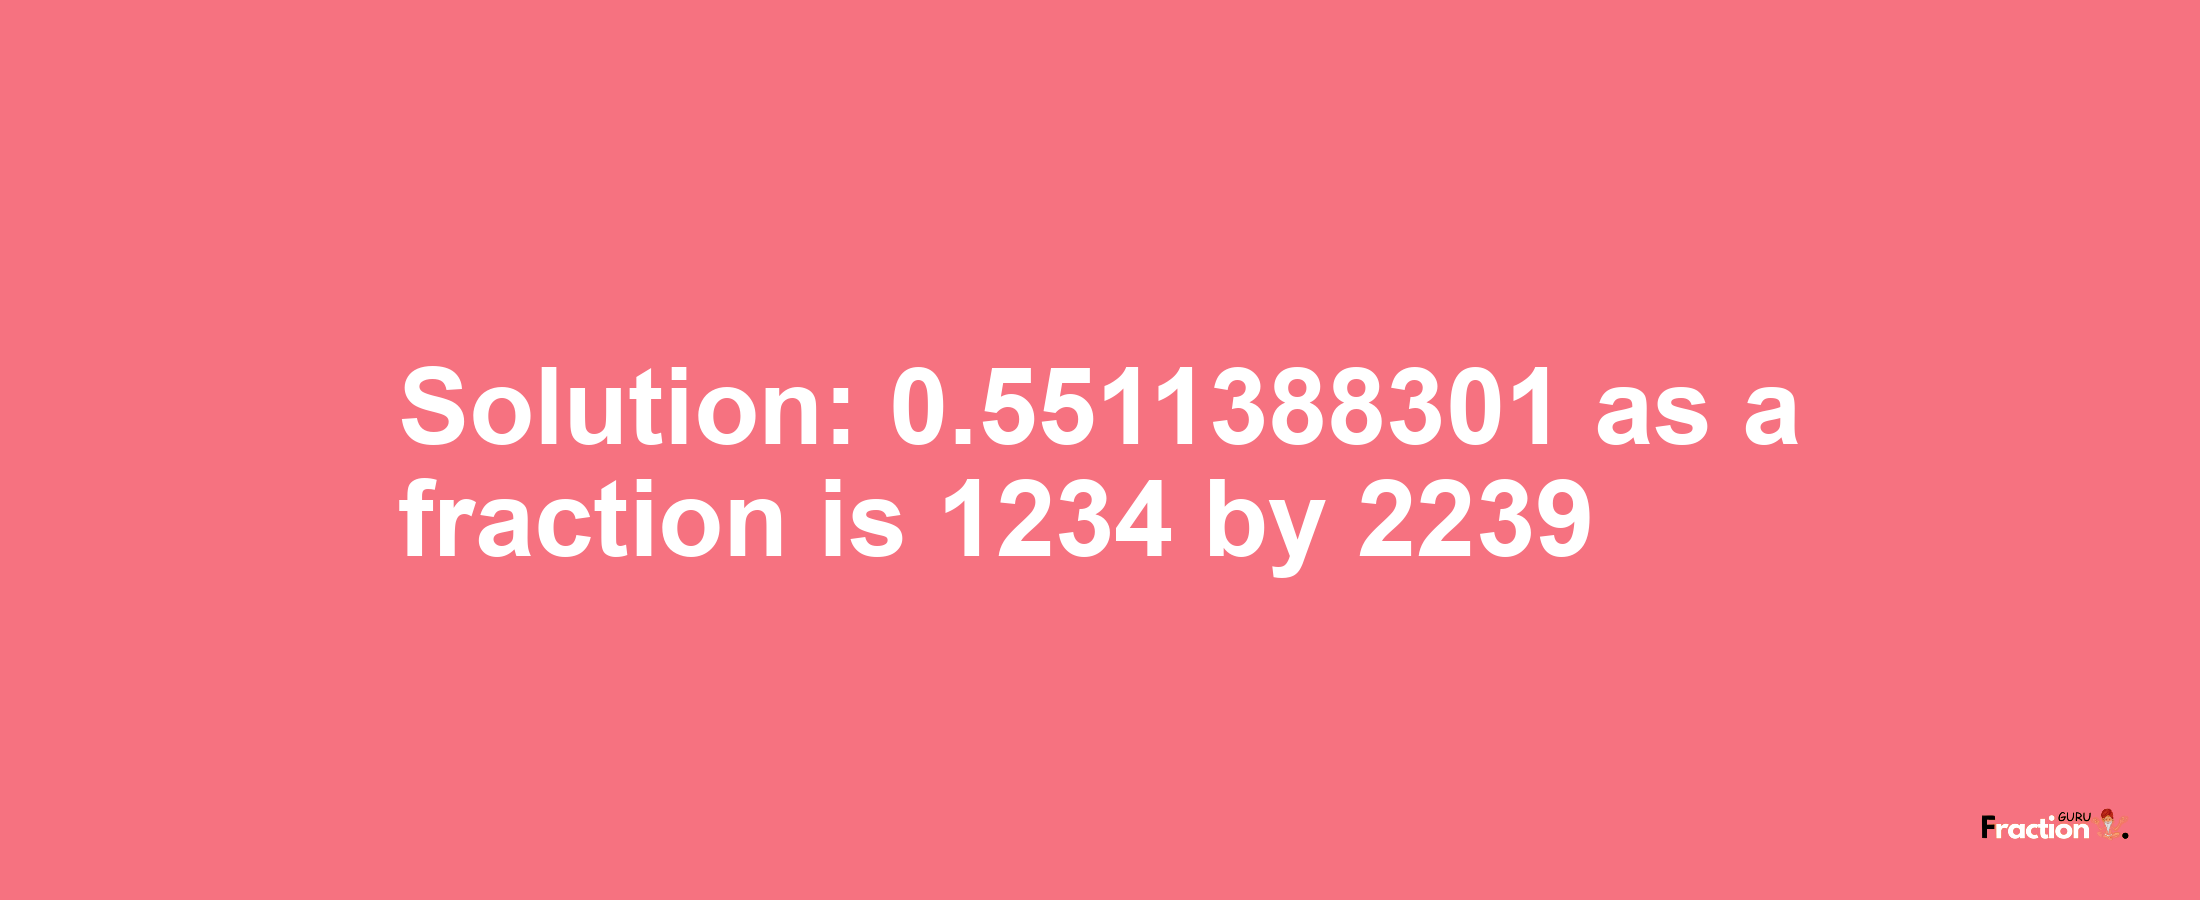 Solution:0.5511388301 as a fraction is 1234/2239